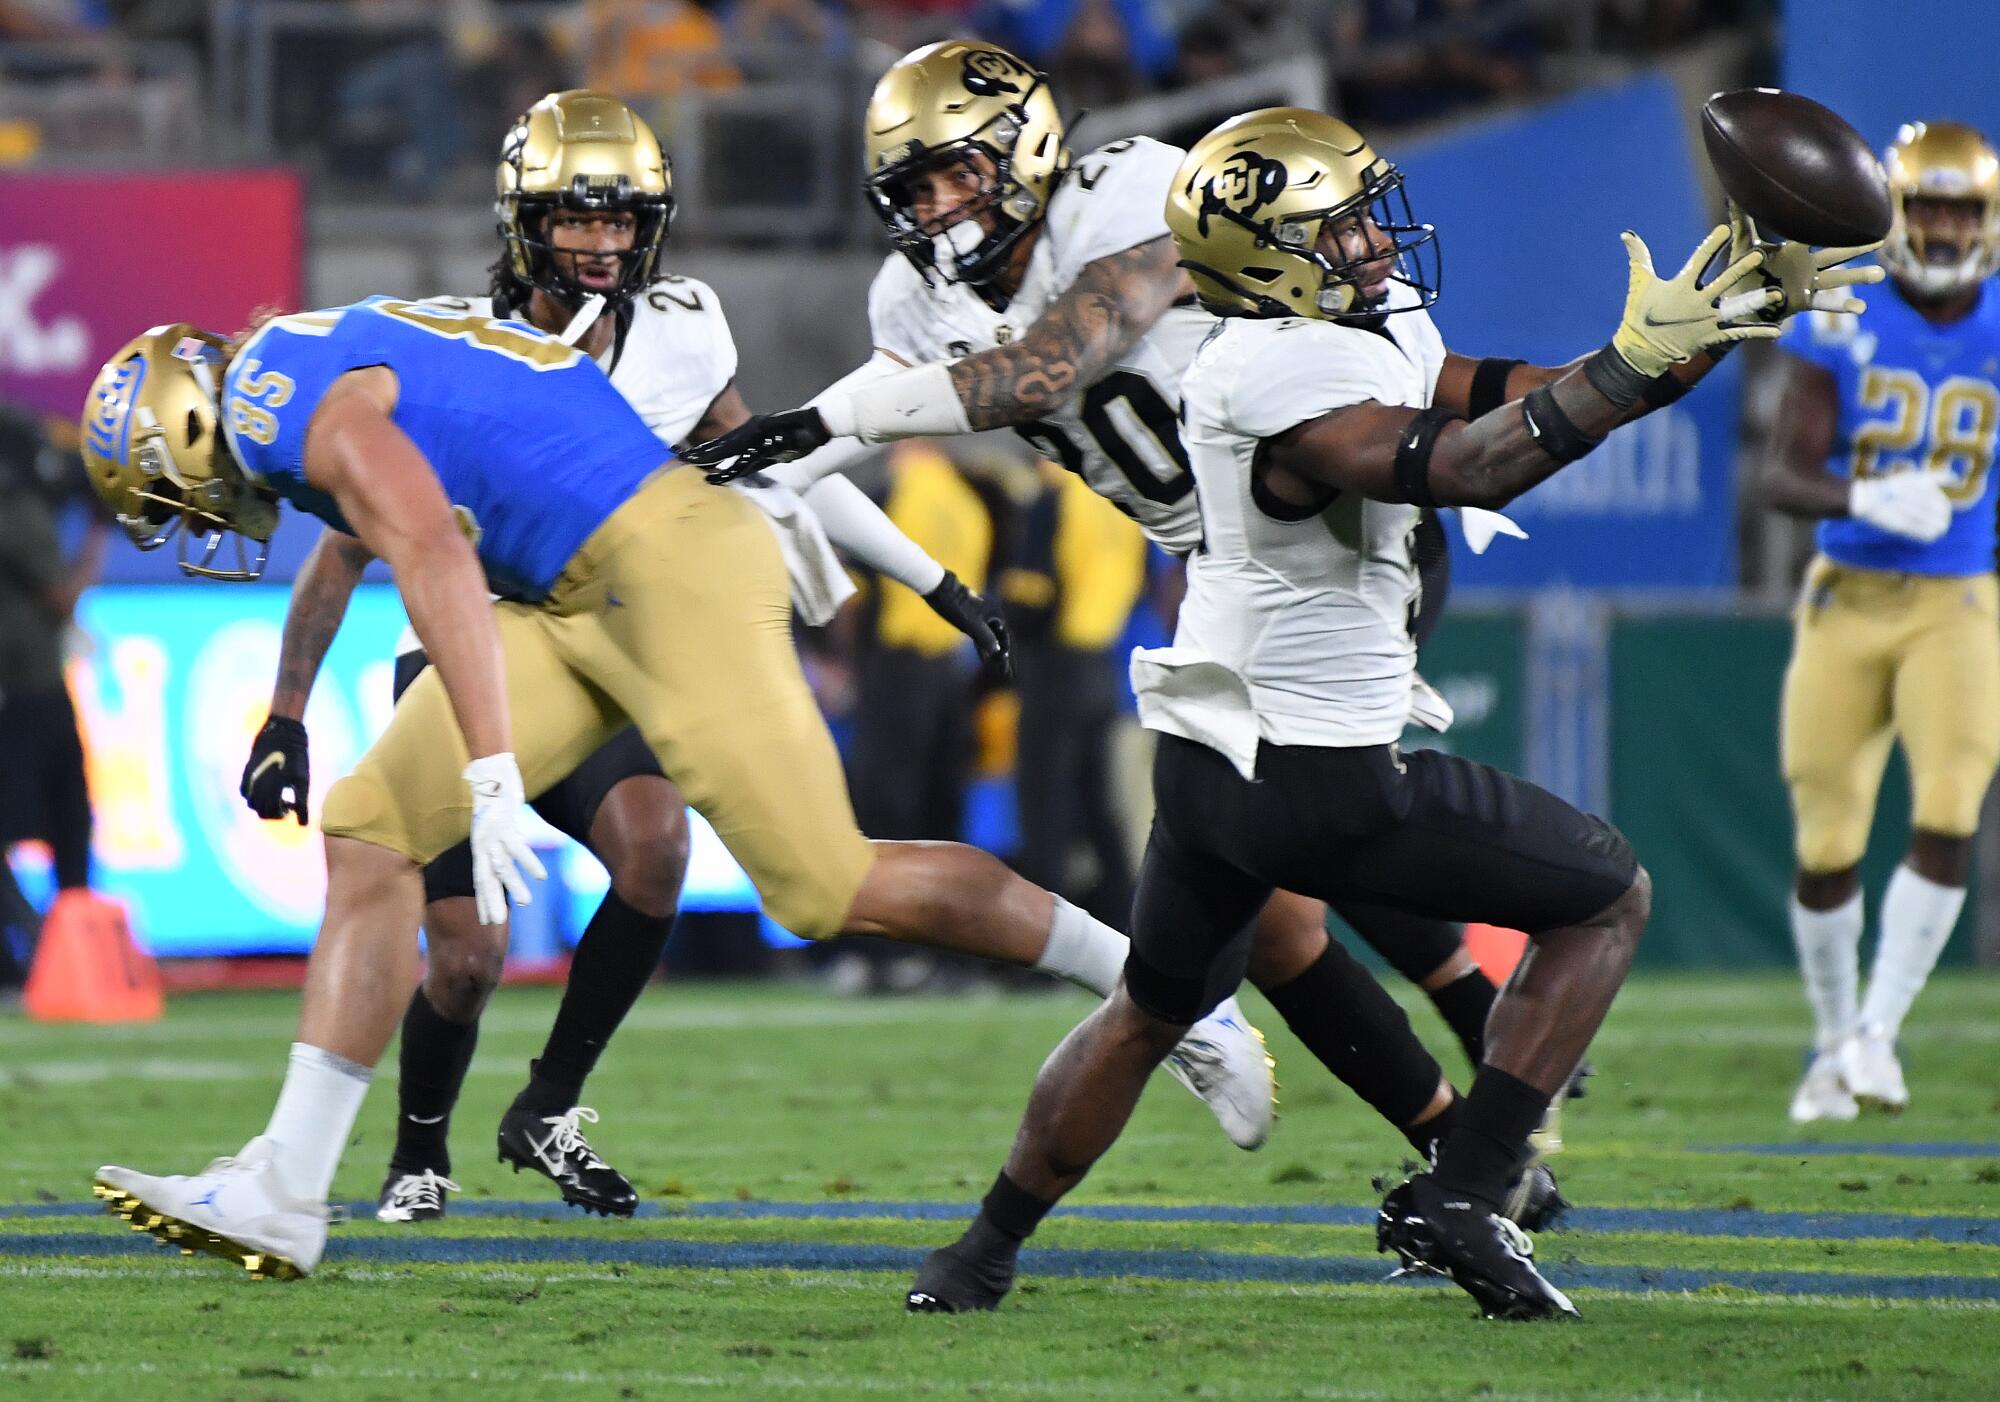  Colorado safety Mark Perry intercepts a pass intended for UCLA tight end Greg Dulcich.